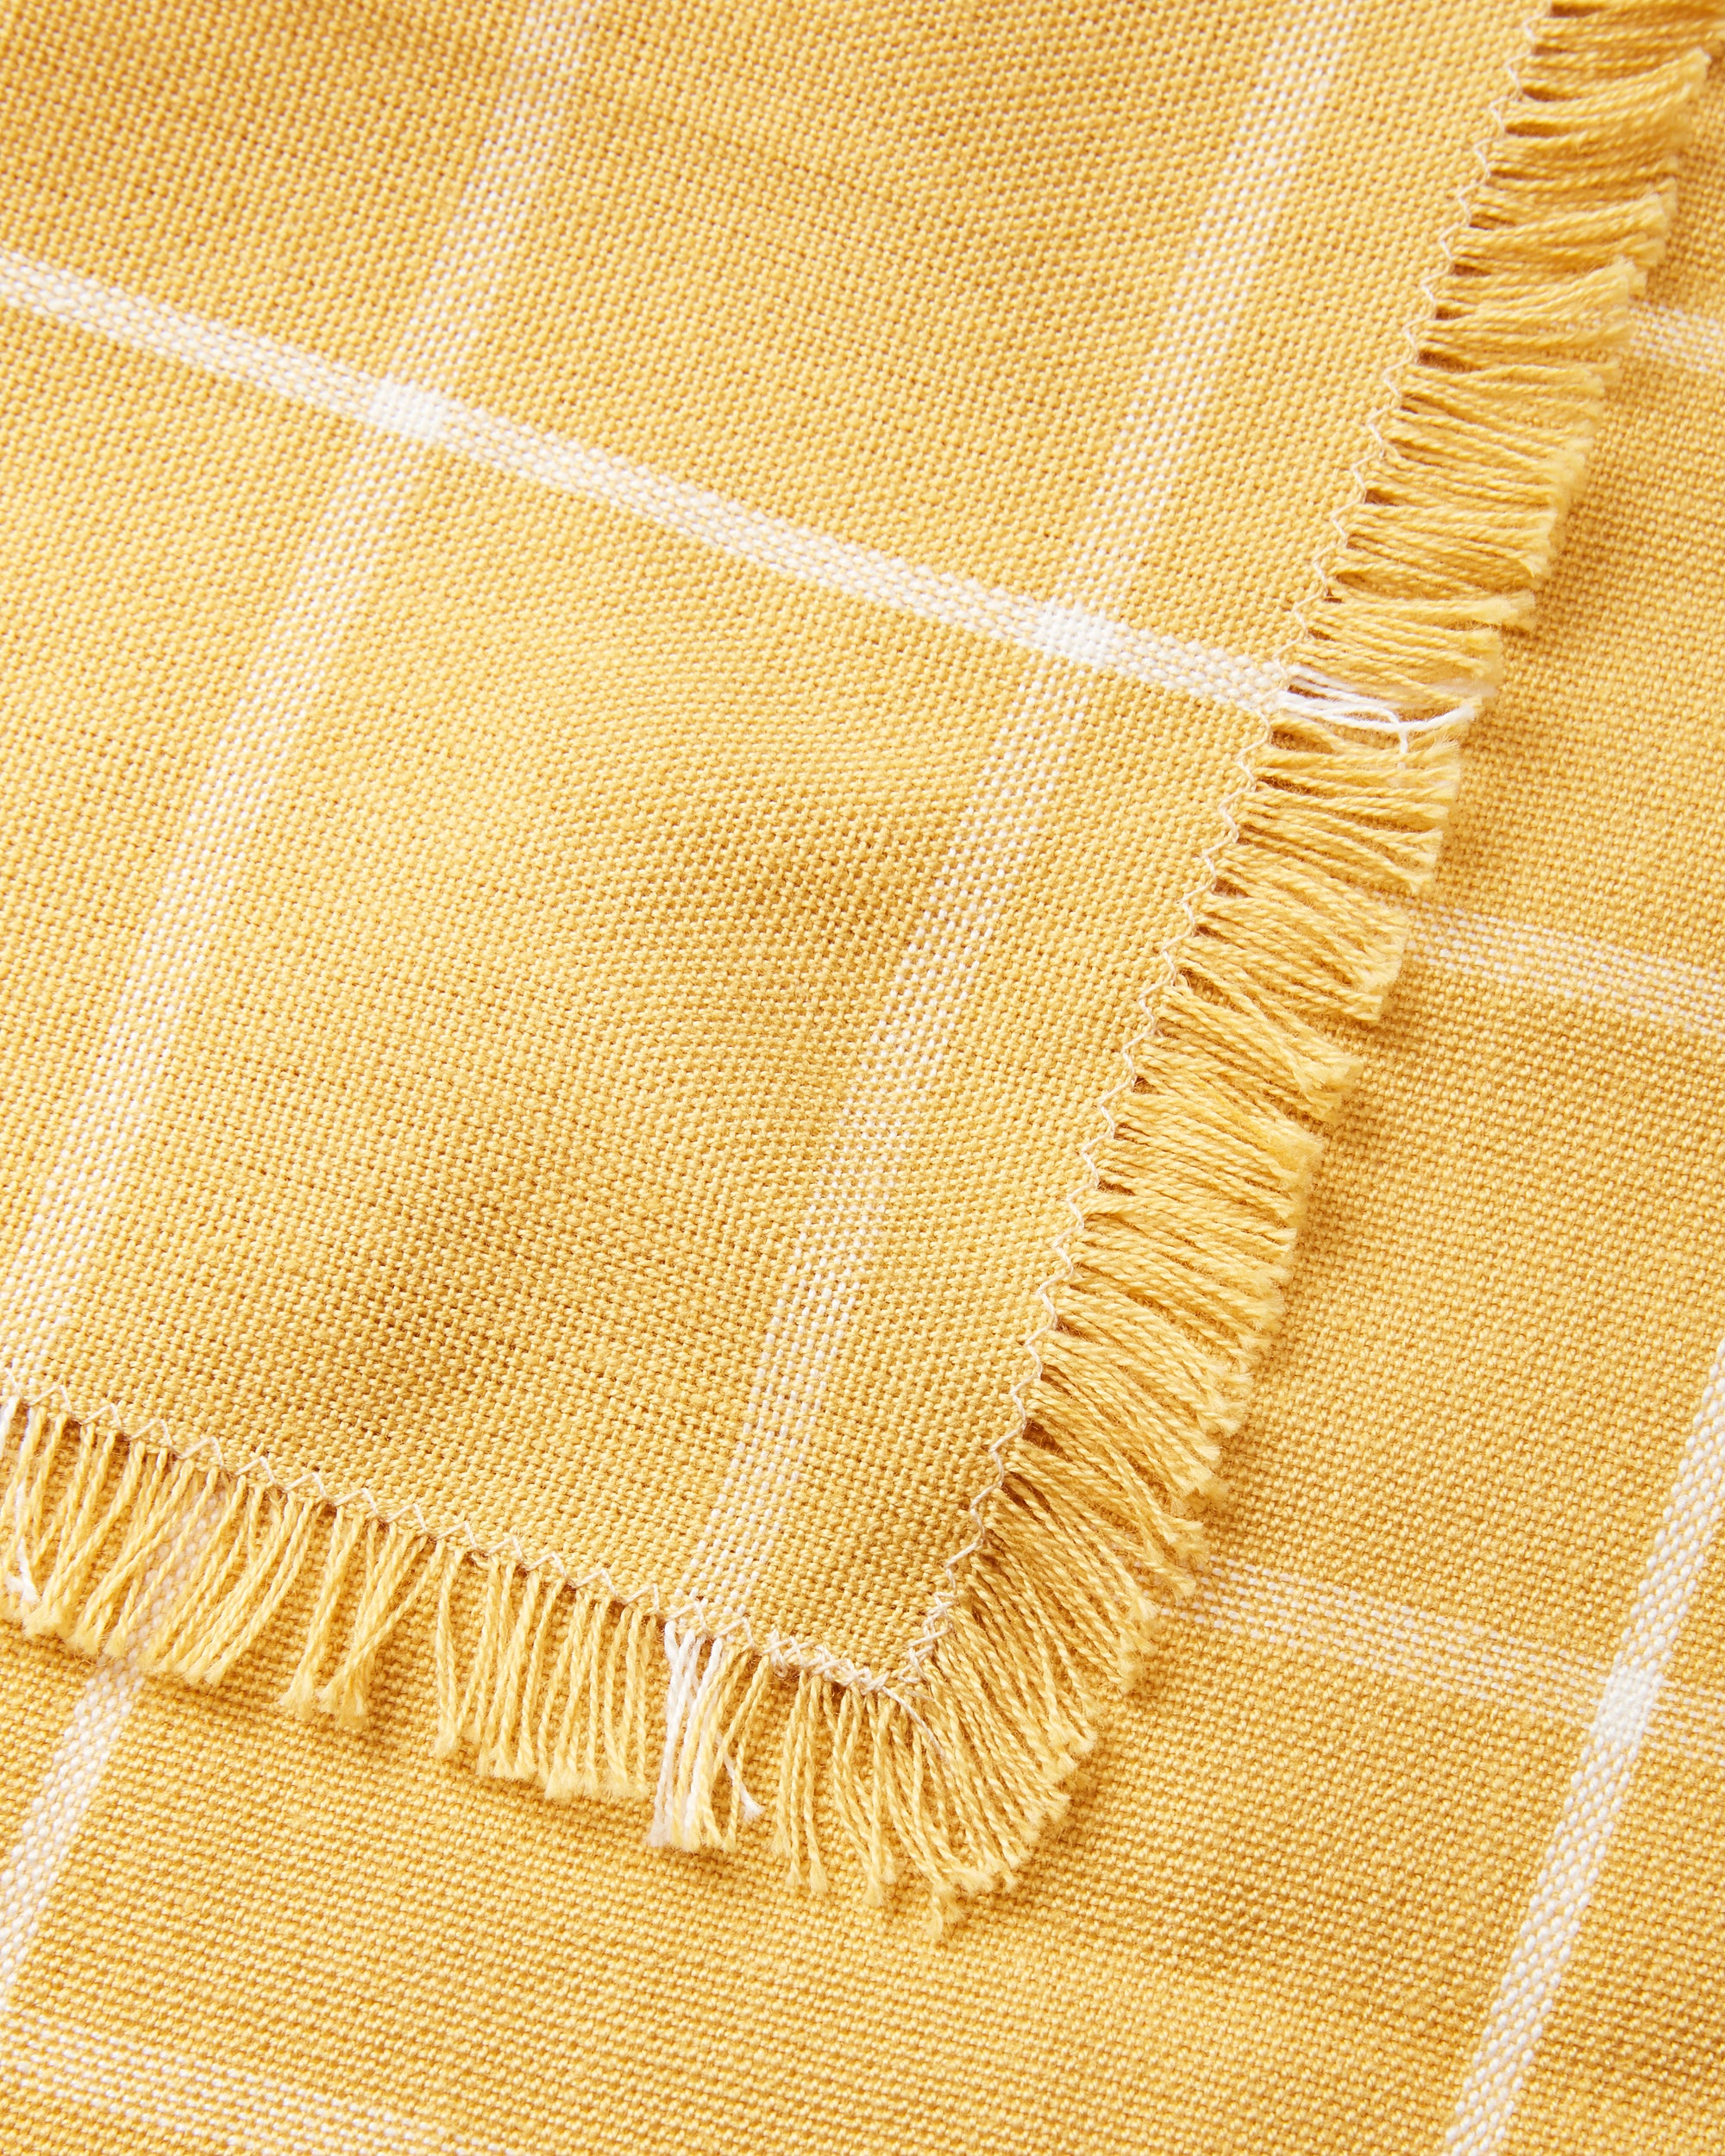 Detail, ethically handwoven MINNA napkins with gold grid pattern, yellow